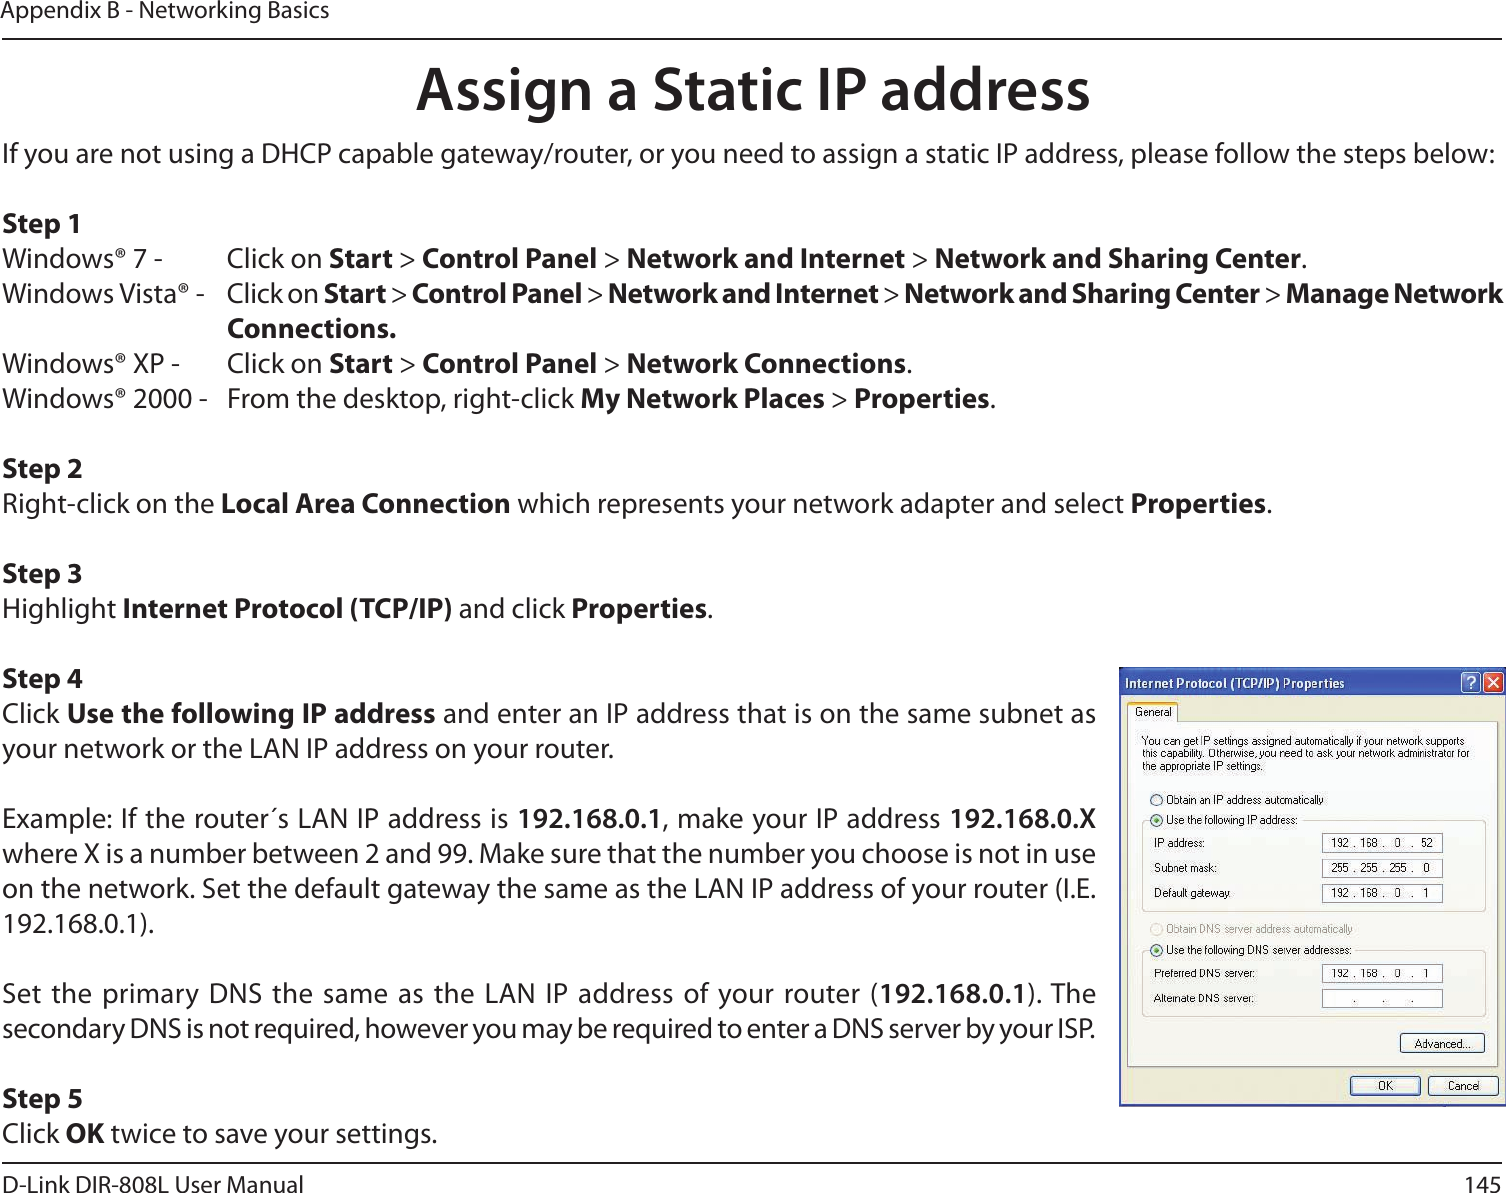 145D-Link DIR-808L User ManualAppendix B - Networking BasicsAssign a Static IP addressIf you are not using a DHCP capable gateway/router, or you need to assign a static IP address, please follow the steps below:Step 1Windows® 7 -  Click on Start &gt; Control Panel &gt; Network and Internet &gt; Network and Sharing Center.Windows Vista® -  Click on Start &gt; Control Panel &gt; Network and Internet &gt; Network and Sharing Center &gt; Manage Network      Connections.Windows® XP -  Click on Start &gt; Control Panel &gt; Network Connections.Windows® 2000 -  From the desktop, right-click My Network Places &gt; Properties.Step 2Right-click on the Local Area Connection which represents your network adapter and select Properties.Step 3Highlight Internet Protocol (TCP/IP) and click Properties.Step 4Click Use the following IP address and enter an IP address that is on the same subnet as your network or the LAN IP address on your router. Example: If the router´s LAN IP address is 192.168.0.1, make your IP address 192.168.0.X where X is a number between 2 and 99. Make sure that the number you choose is not in use on the network. Set the default gateway the same as the LAN IP address of your router (I.E. 192.168.0.1). Set the  primary  DNS the  same as  the LAN  IP address of  your router (192.168.0.1). The secondary DNS is not required, however you may be required to enter a DNS server by your ISP.Step 5Click OK twice to save your settings.